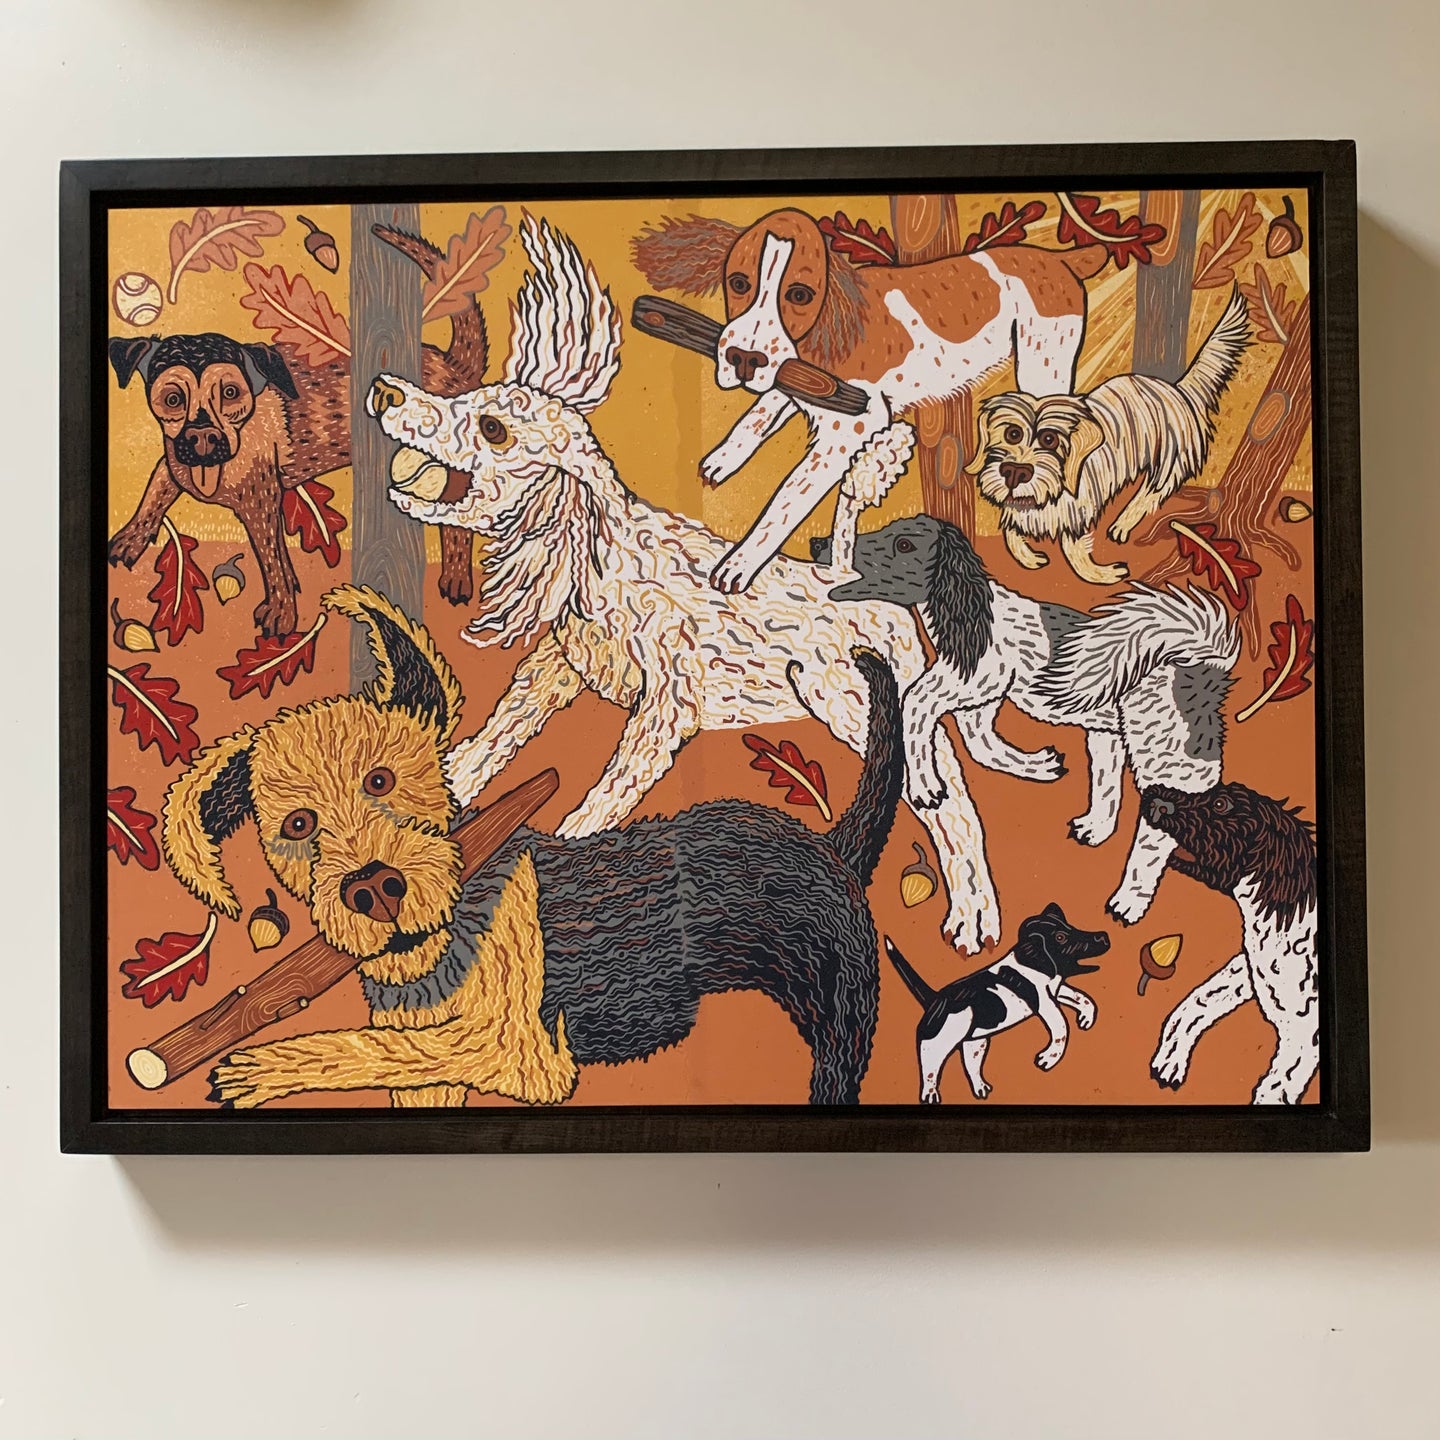 Big dog woodcut with poodles and friends framed in black